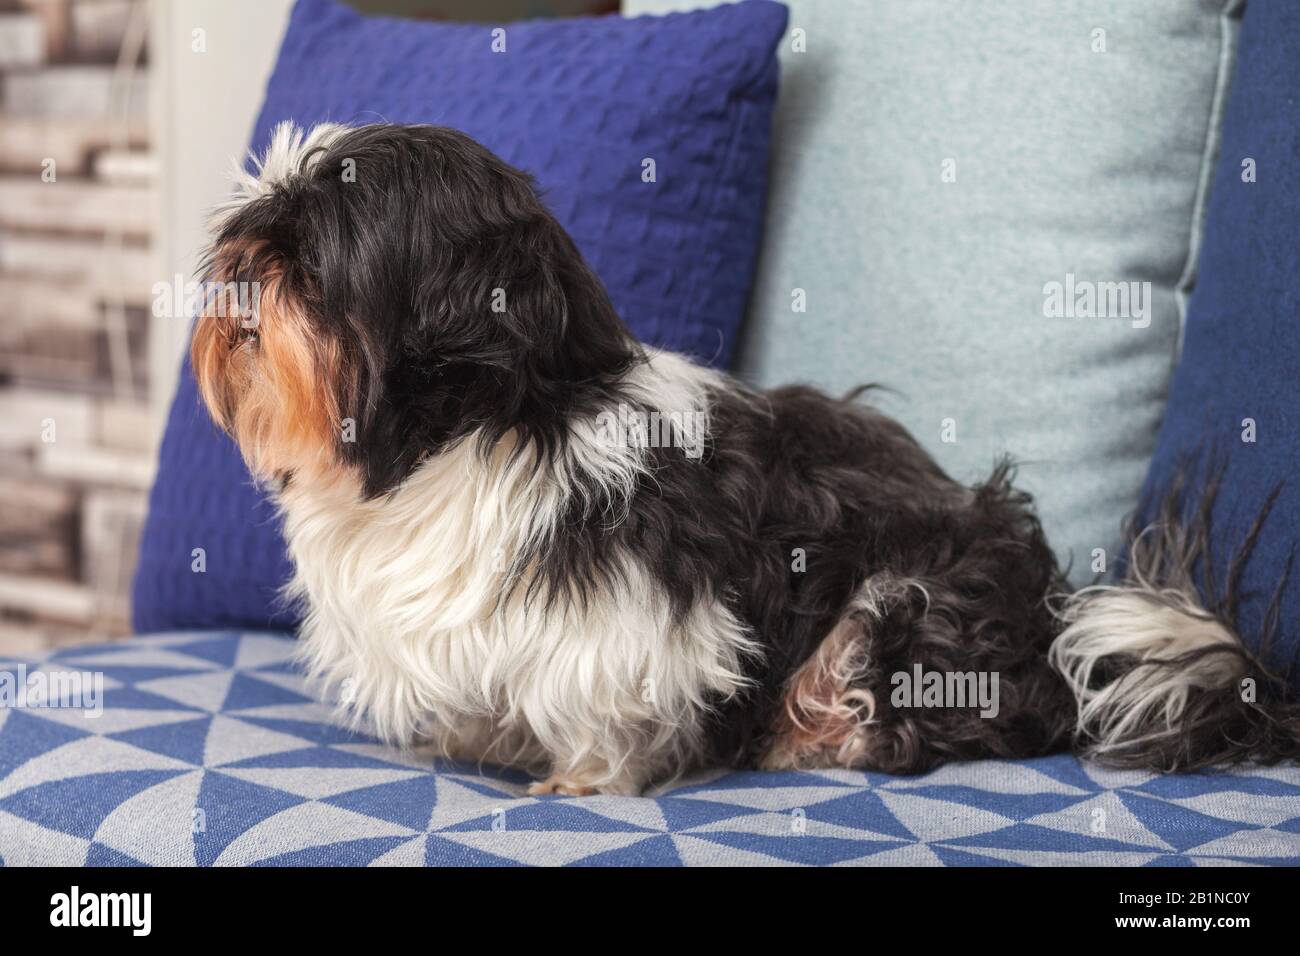 Funny dog is sitting at home on the couch. Shih Tzu breed. pet. Homeliness. Stock Photo